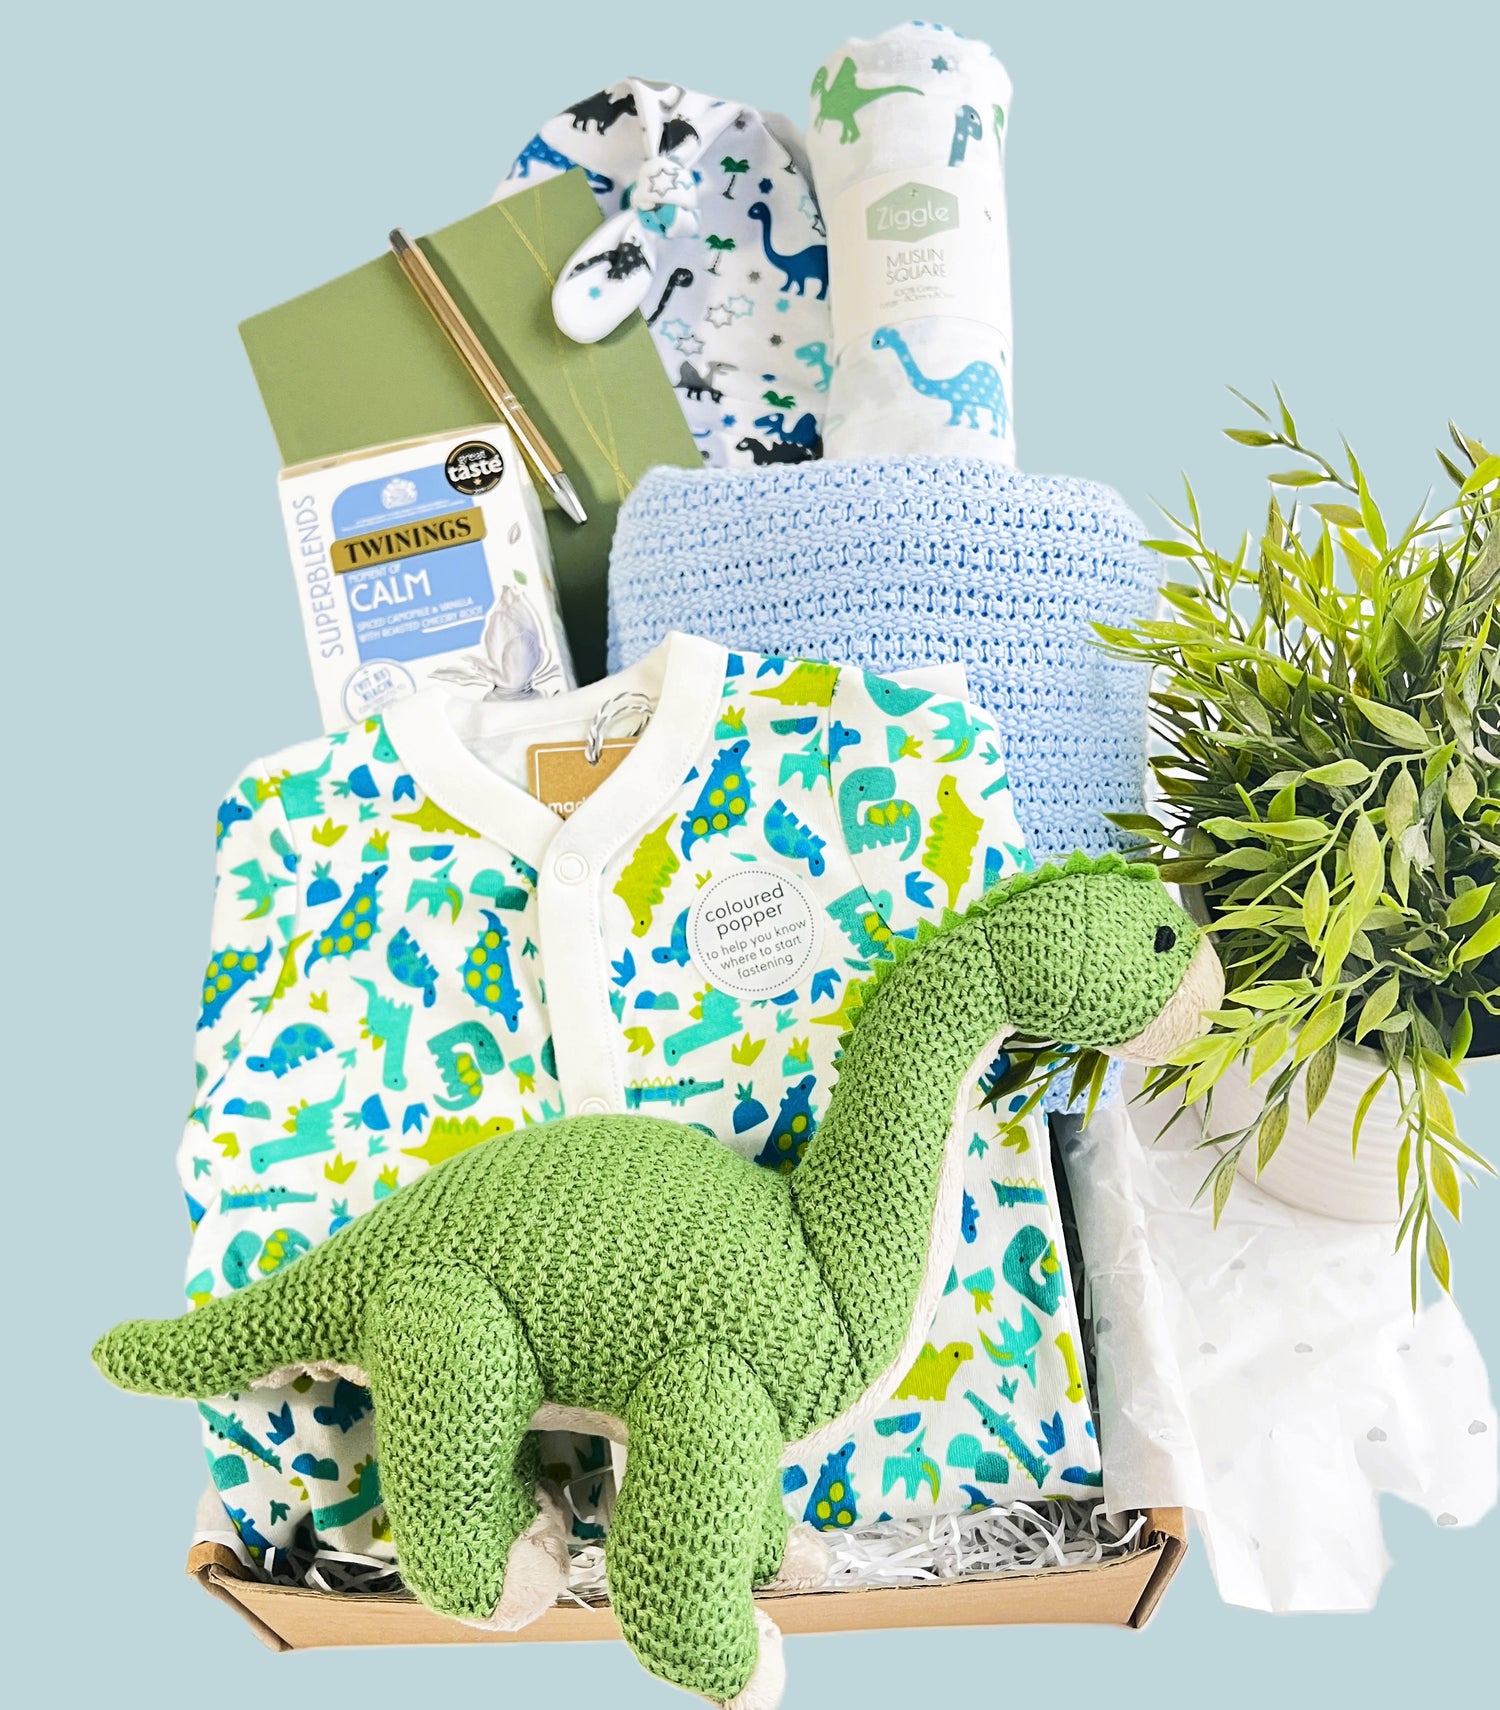 Newborn baby boy hamper gift, dinosaur themed with a green Wilberry medium brontosaurs baby toy, dinosaur print baby sleepsuit, blue soft cotton cellular baby blanket, calming tea for the new parents, a baby journal and baby knot hat and muslin square.